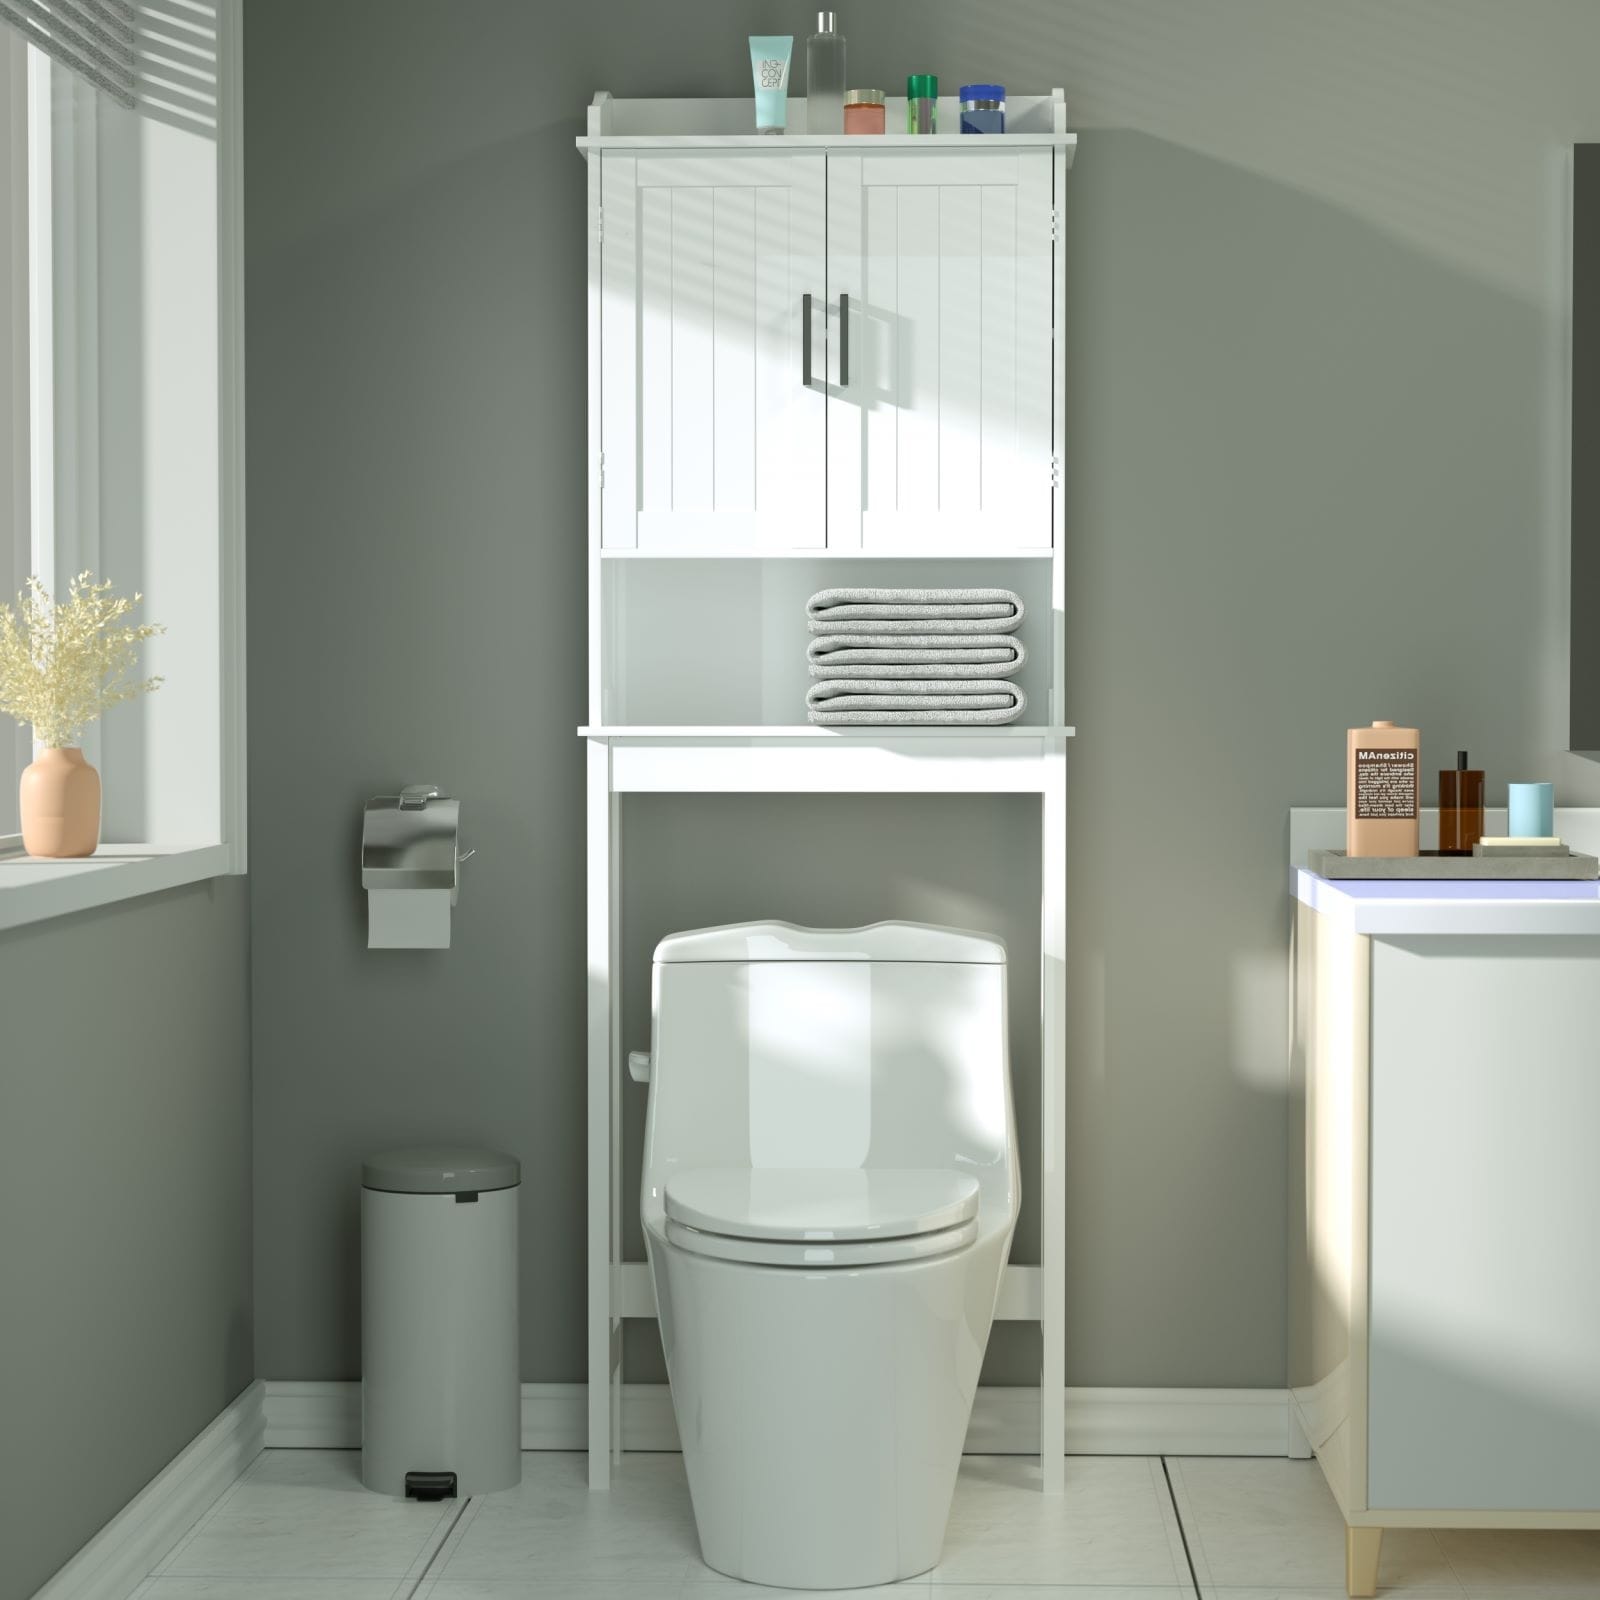 https://ak1.ostkcdn.com/images/products/is/images/direct/e6e3381b57f369a5583d1aa77778f76e8676fd97/VEIKOUS-Bathroom-Over-The-Toilet-Storage-Cabinet-Organizer-With-Doors-and-Shelves.jpg